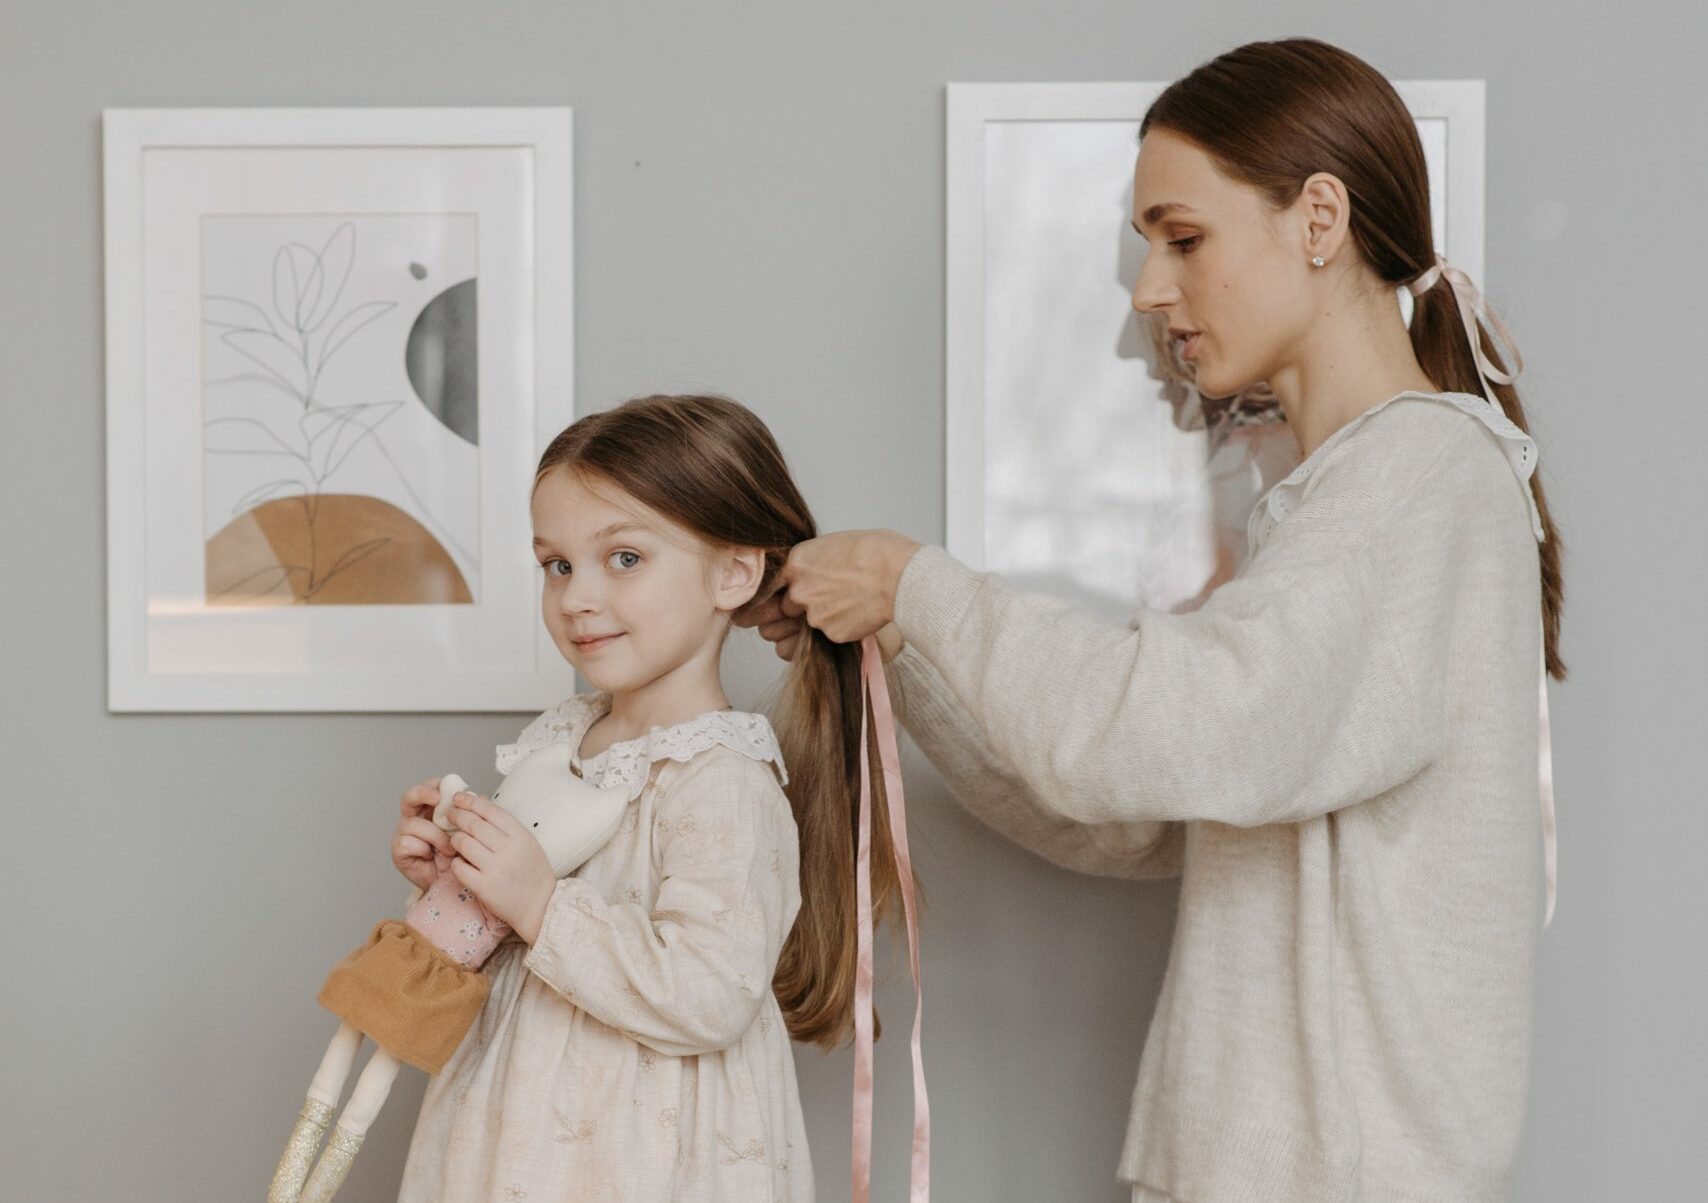 A mother tying her daughter's hair with a ribbon